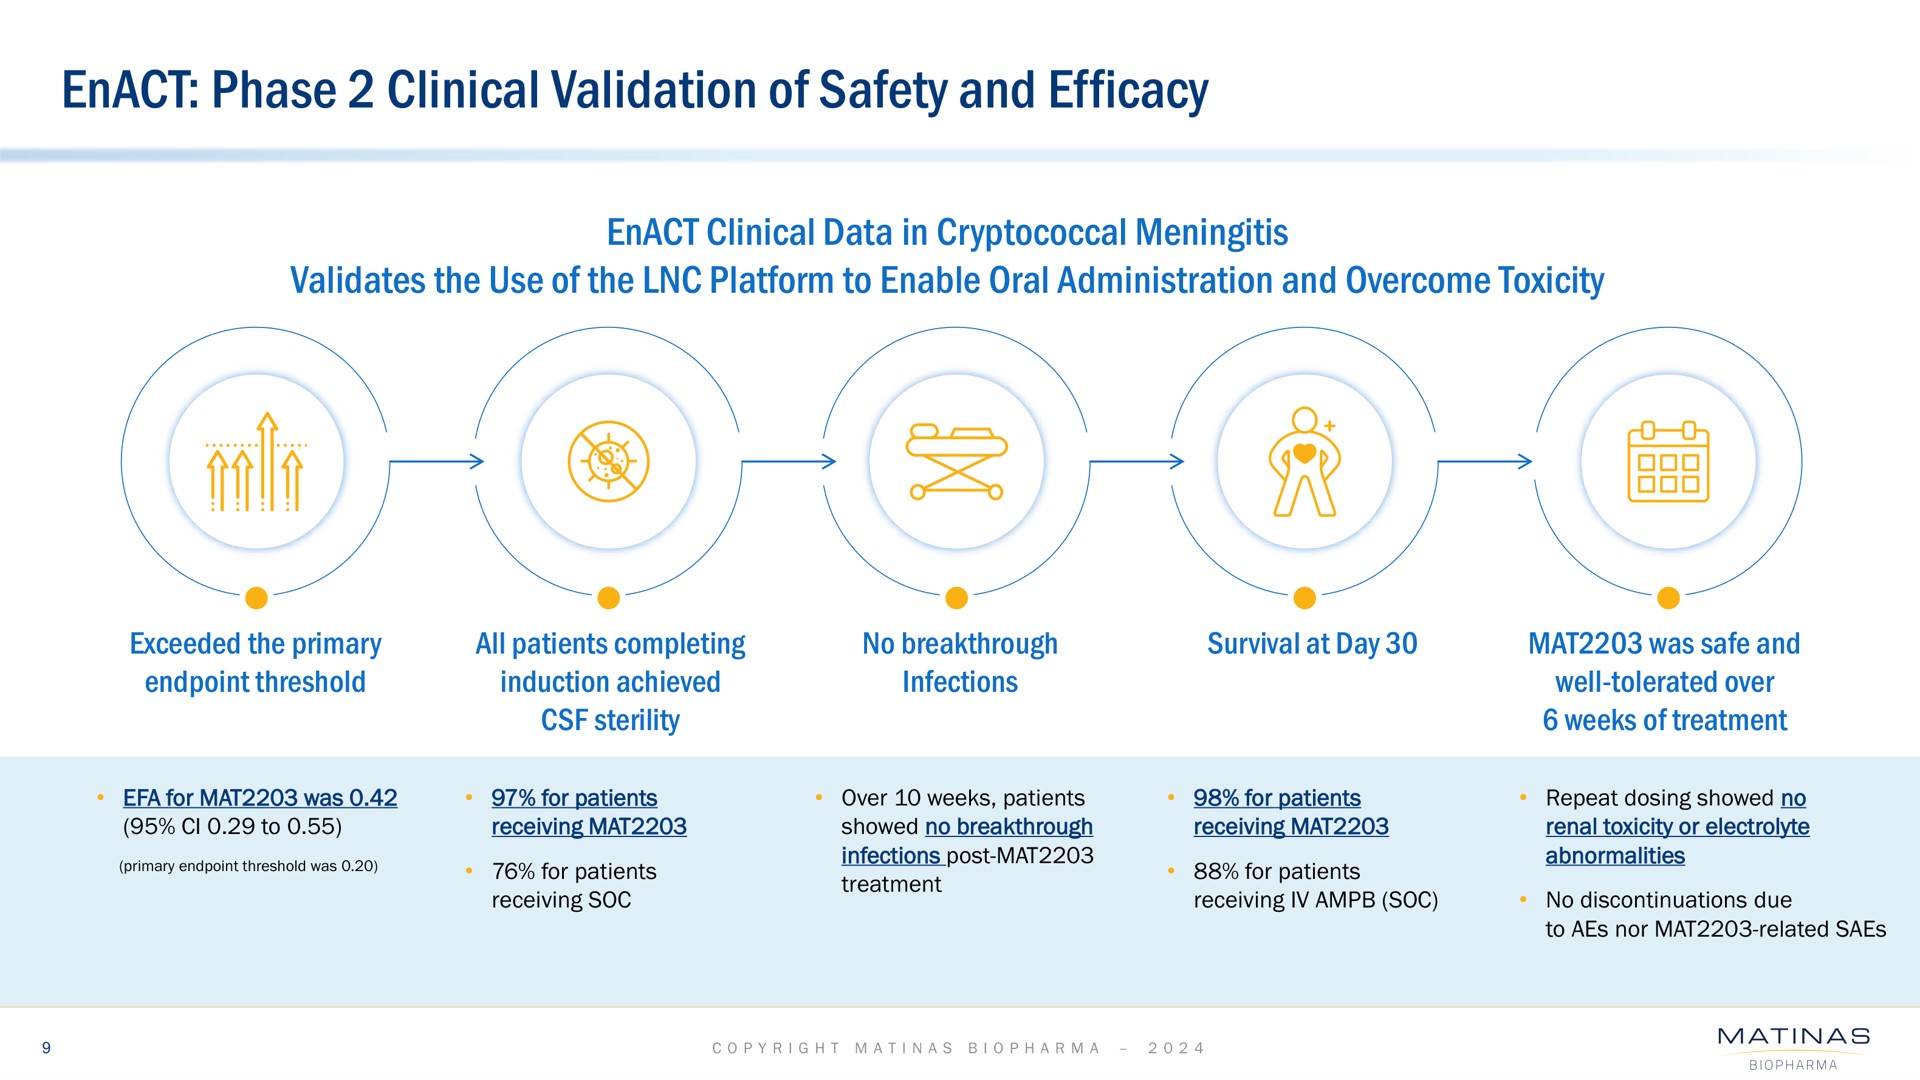 enact phase clinical validation of safety and efficacy | Matinas BioPharma